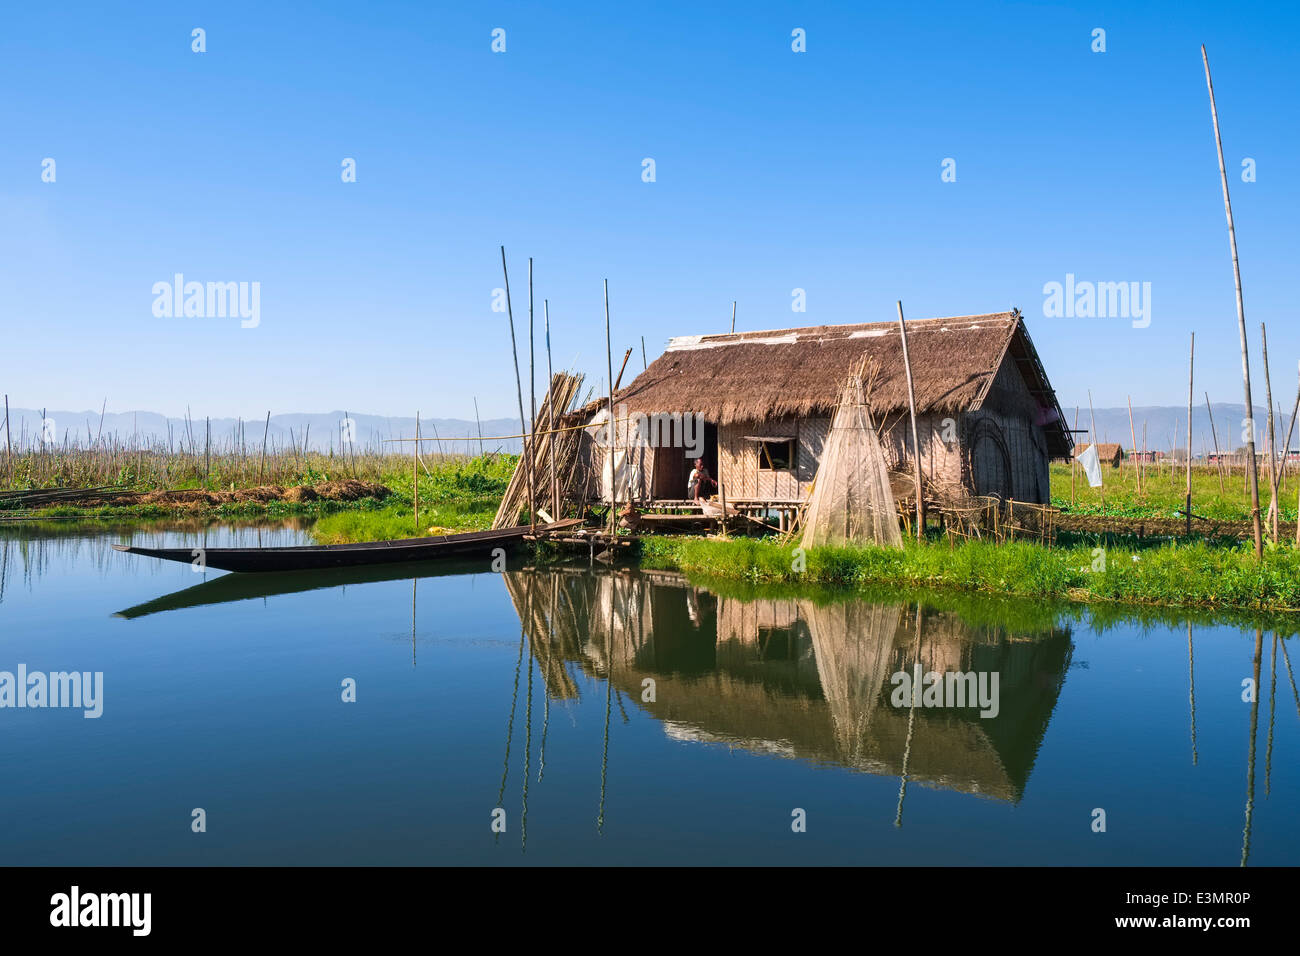 Thatched hut in Floating gardens, Inle Lake, Myanmar, Asia Stock Photo